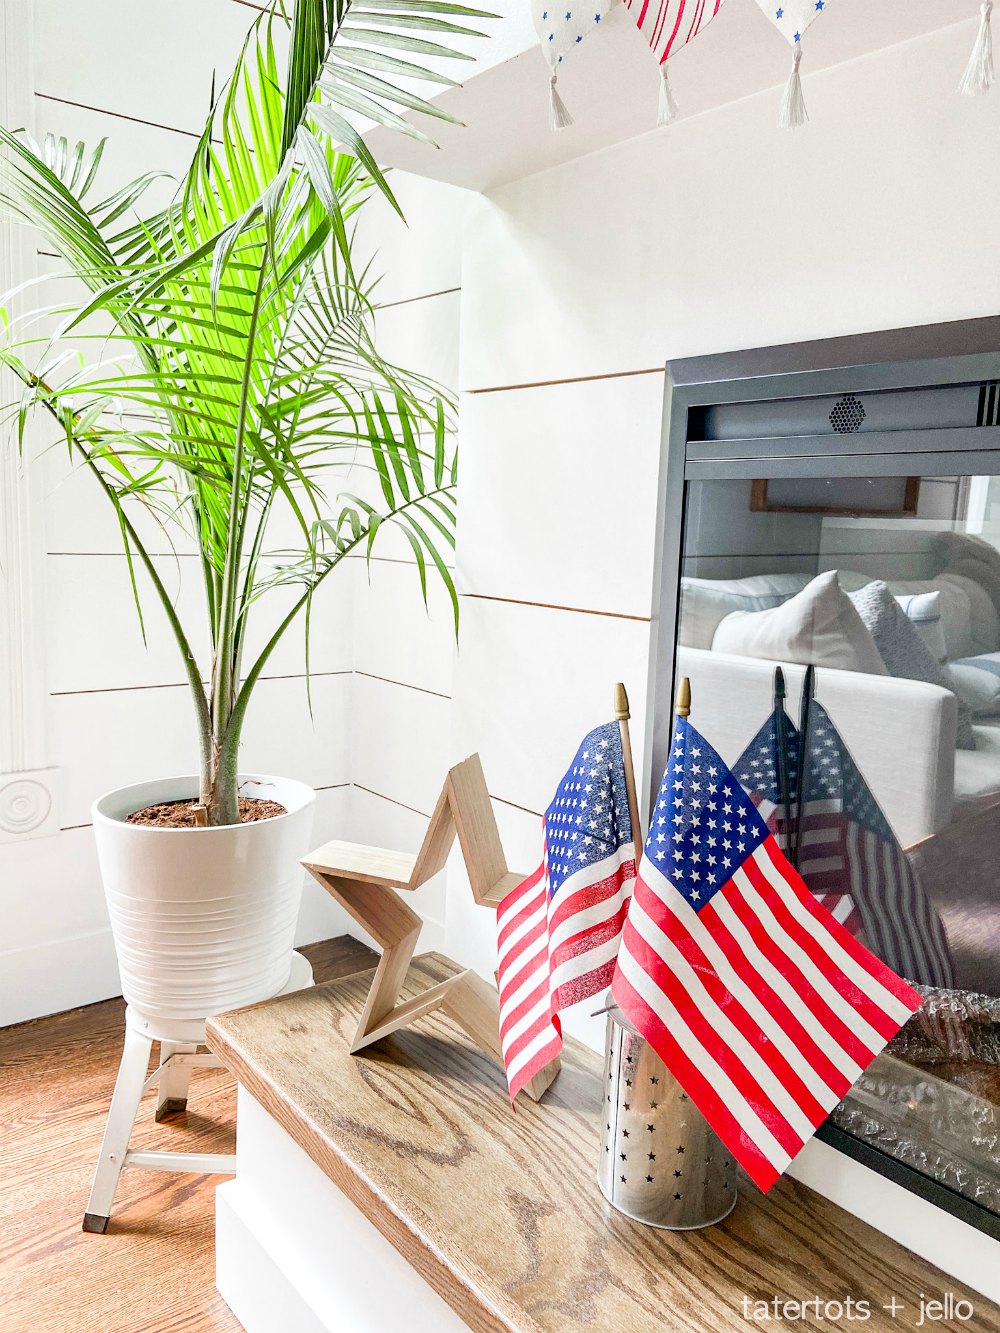 Last-Minute Fourth of July Decorating with Dollar Items. It's not too late to do some easy 4th of July decorating inexpensively with dollar items! 